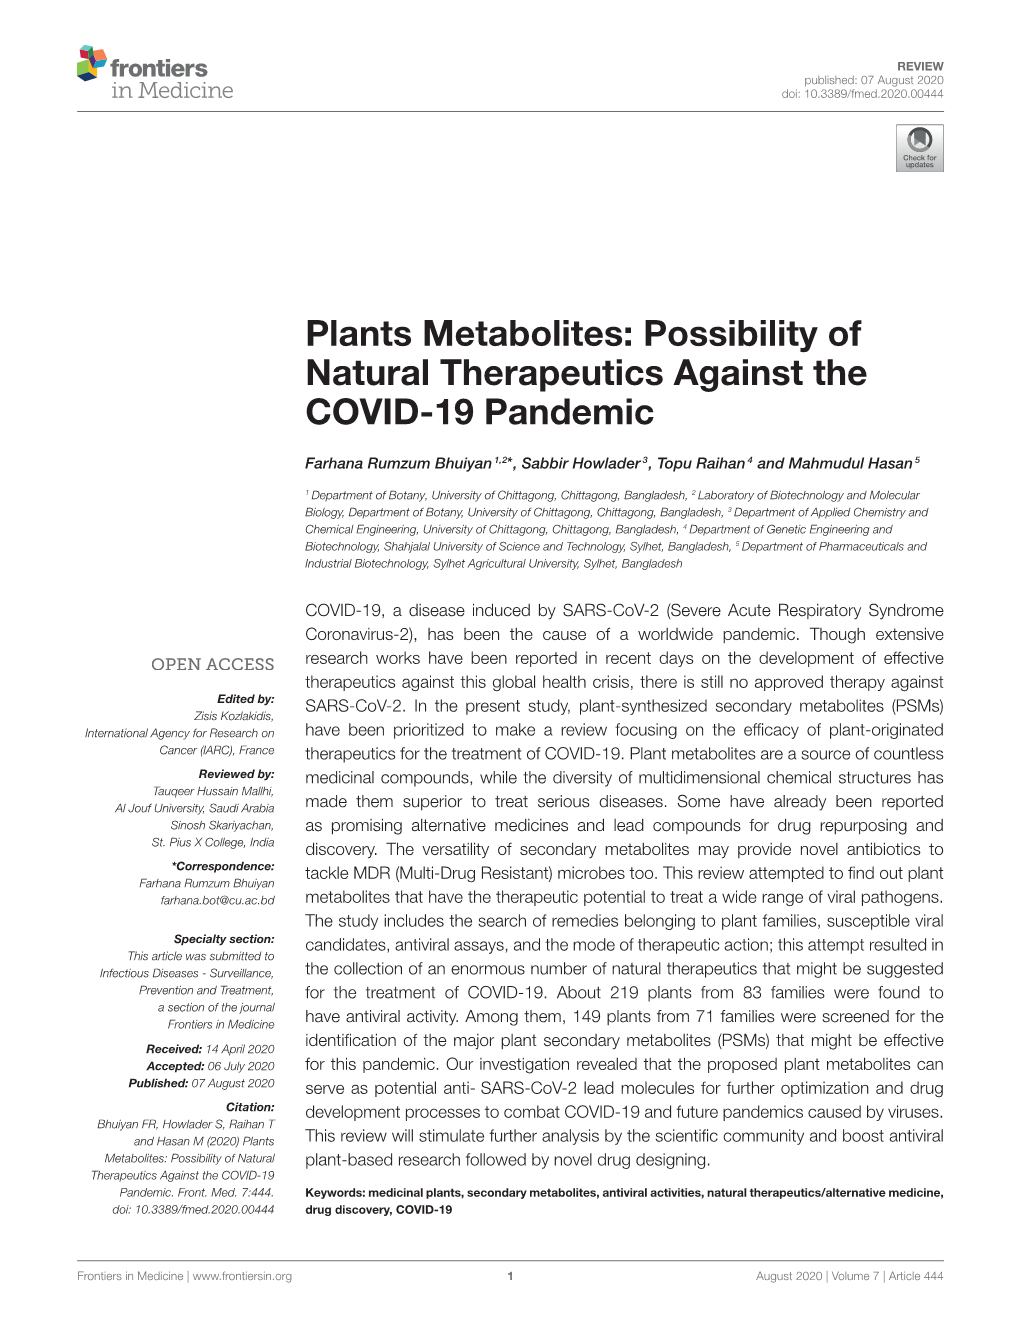 Plants Metabolites: Possibility of Natural Therapeutics Against the COVID-19 Pandemic